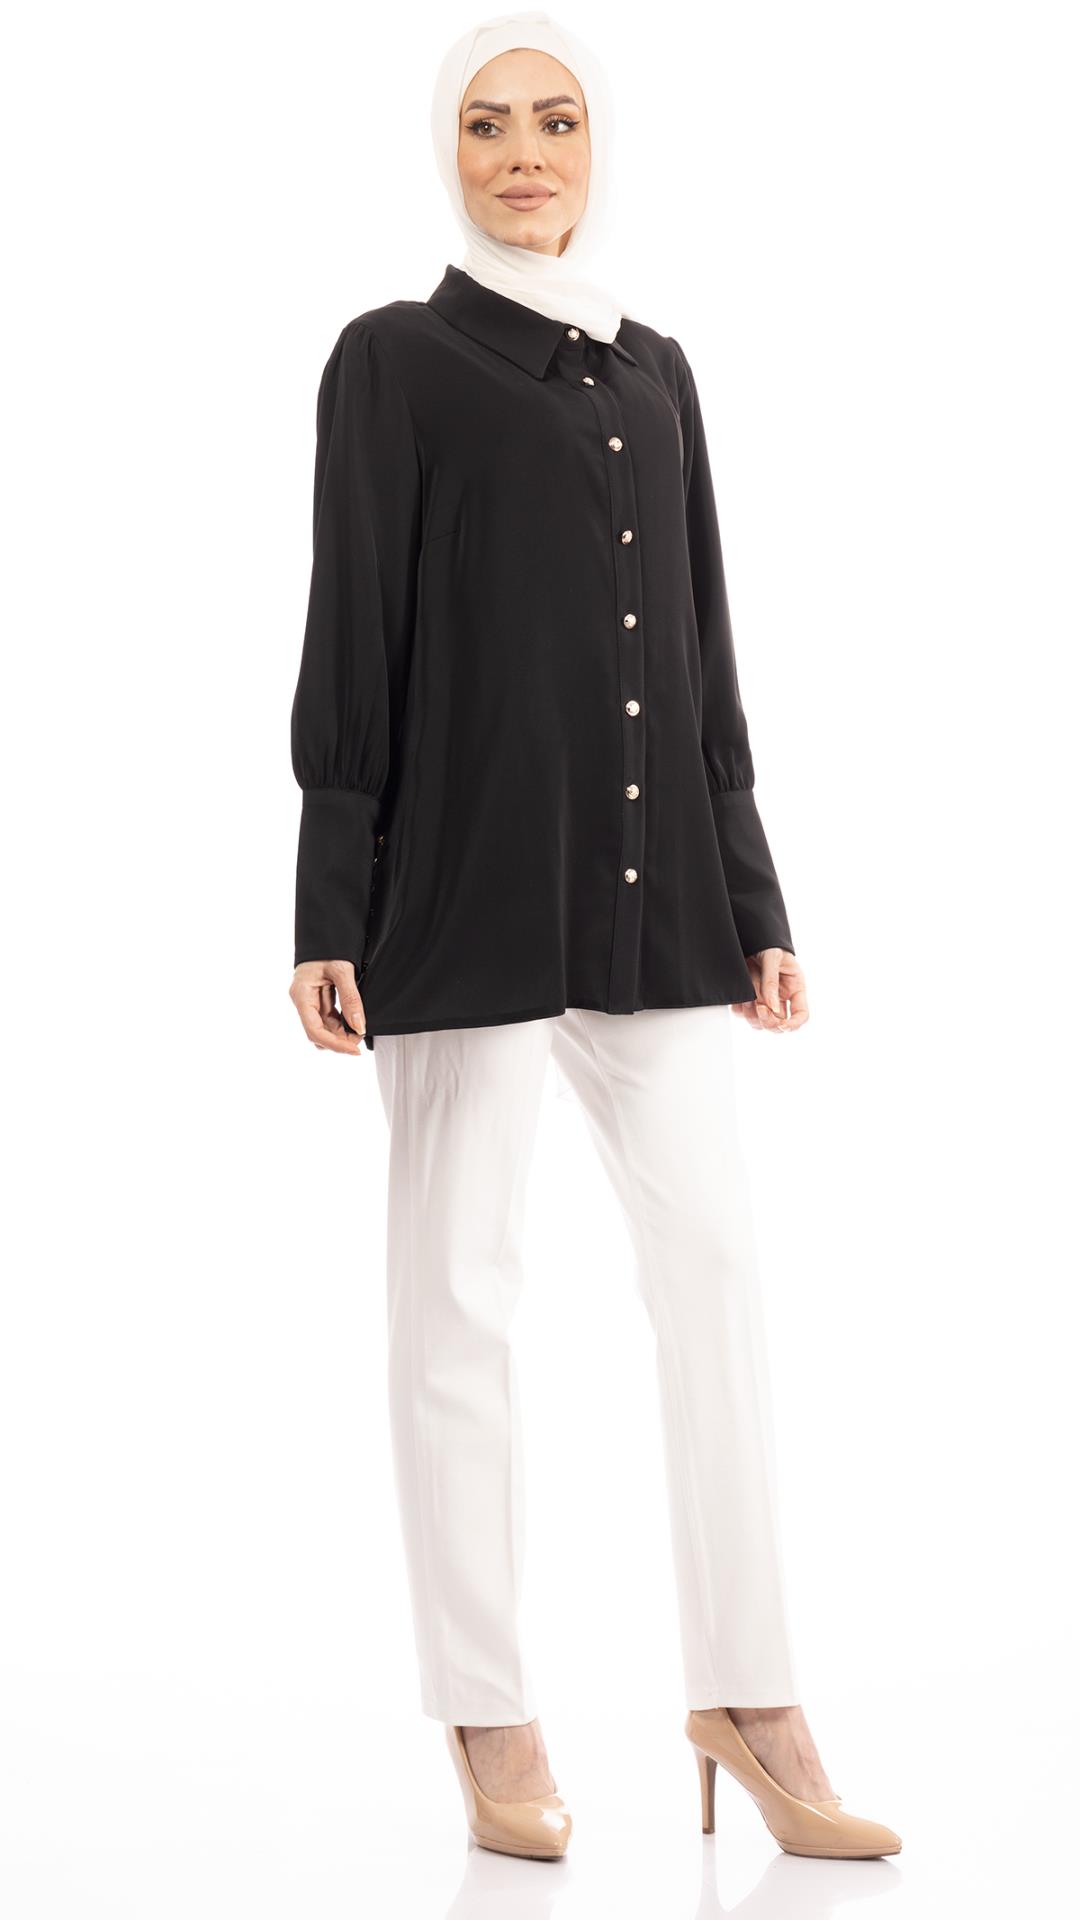 Formal shirt with six buttons on the sleeve